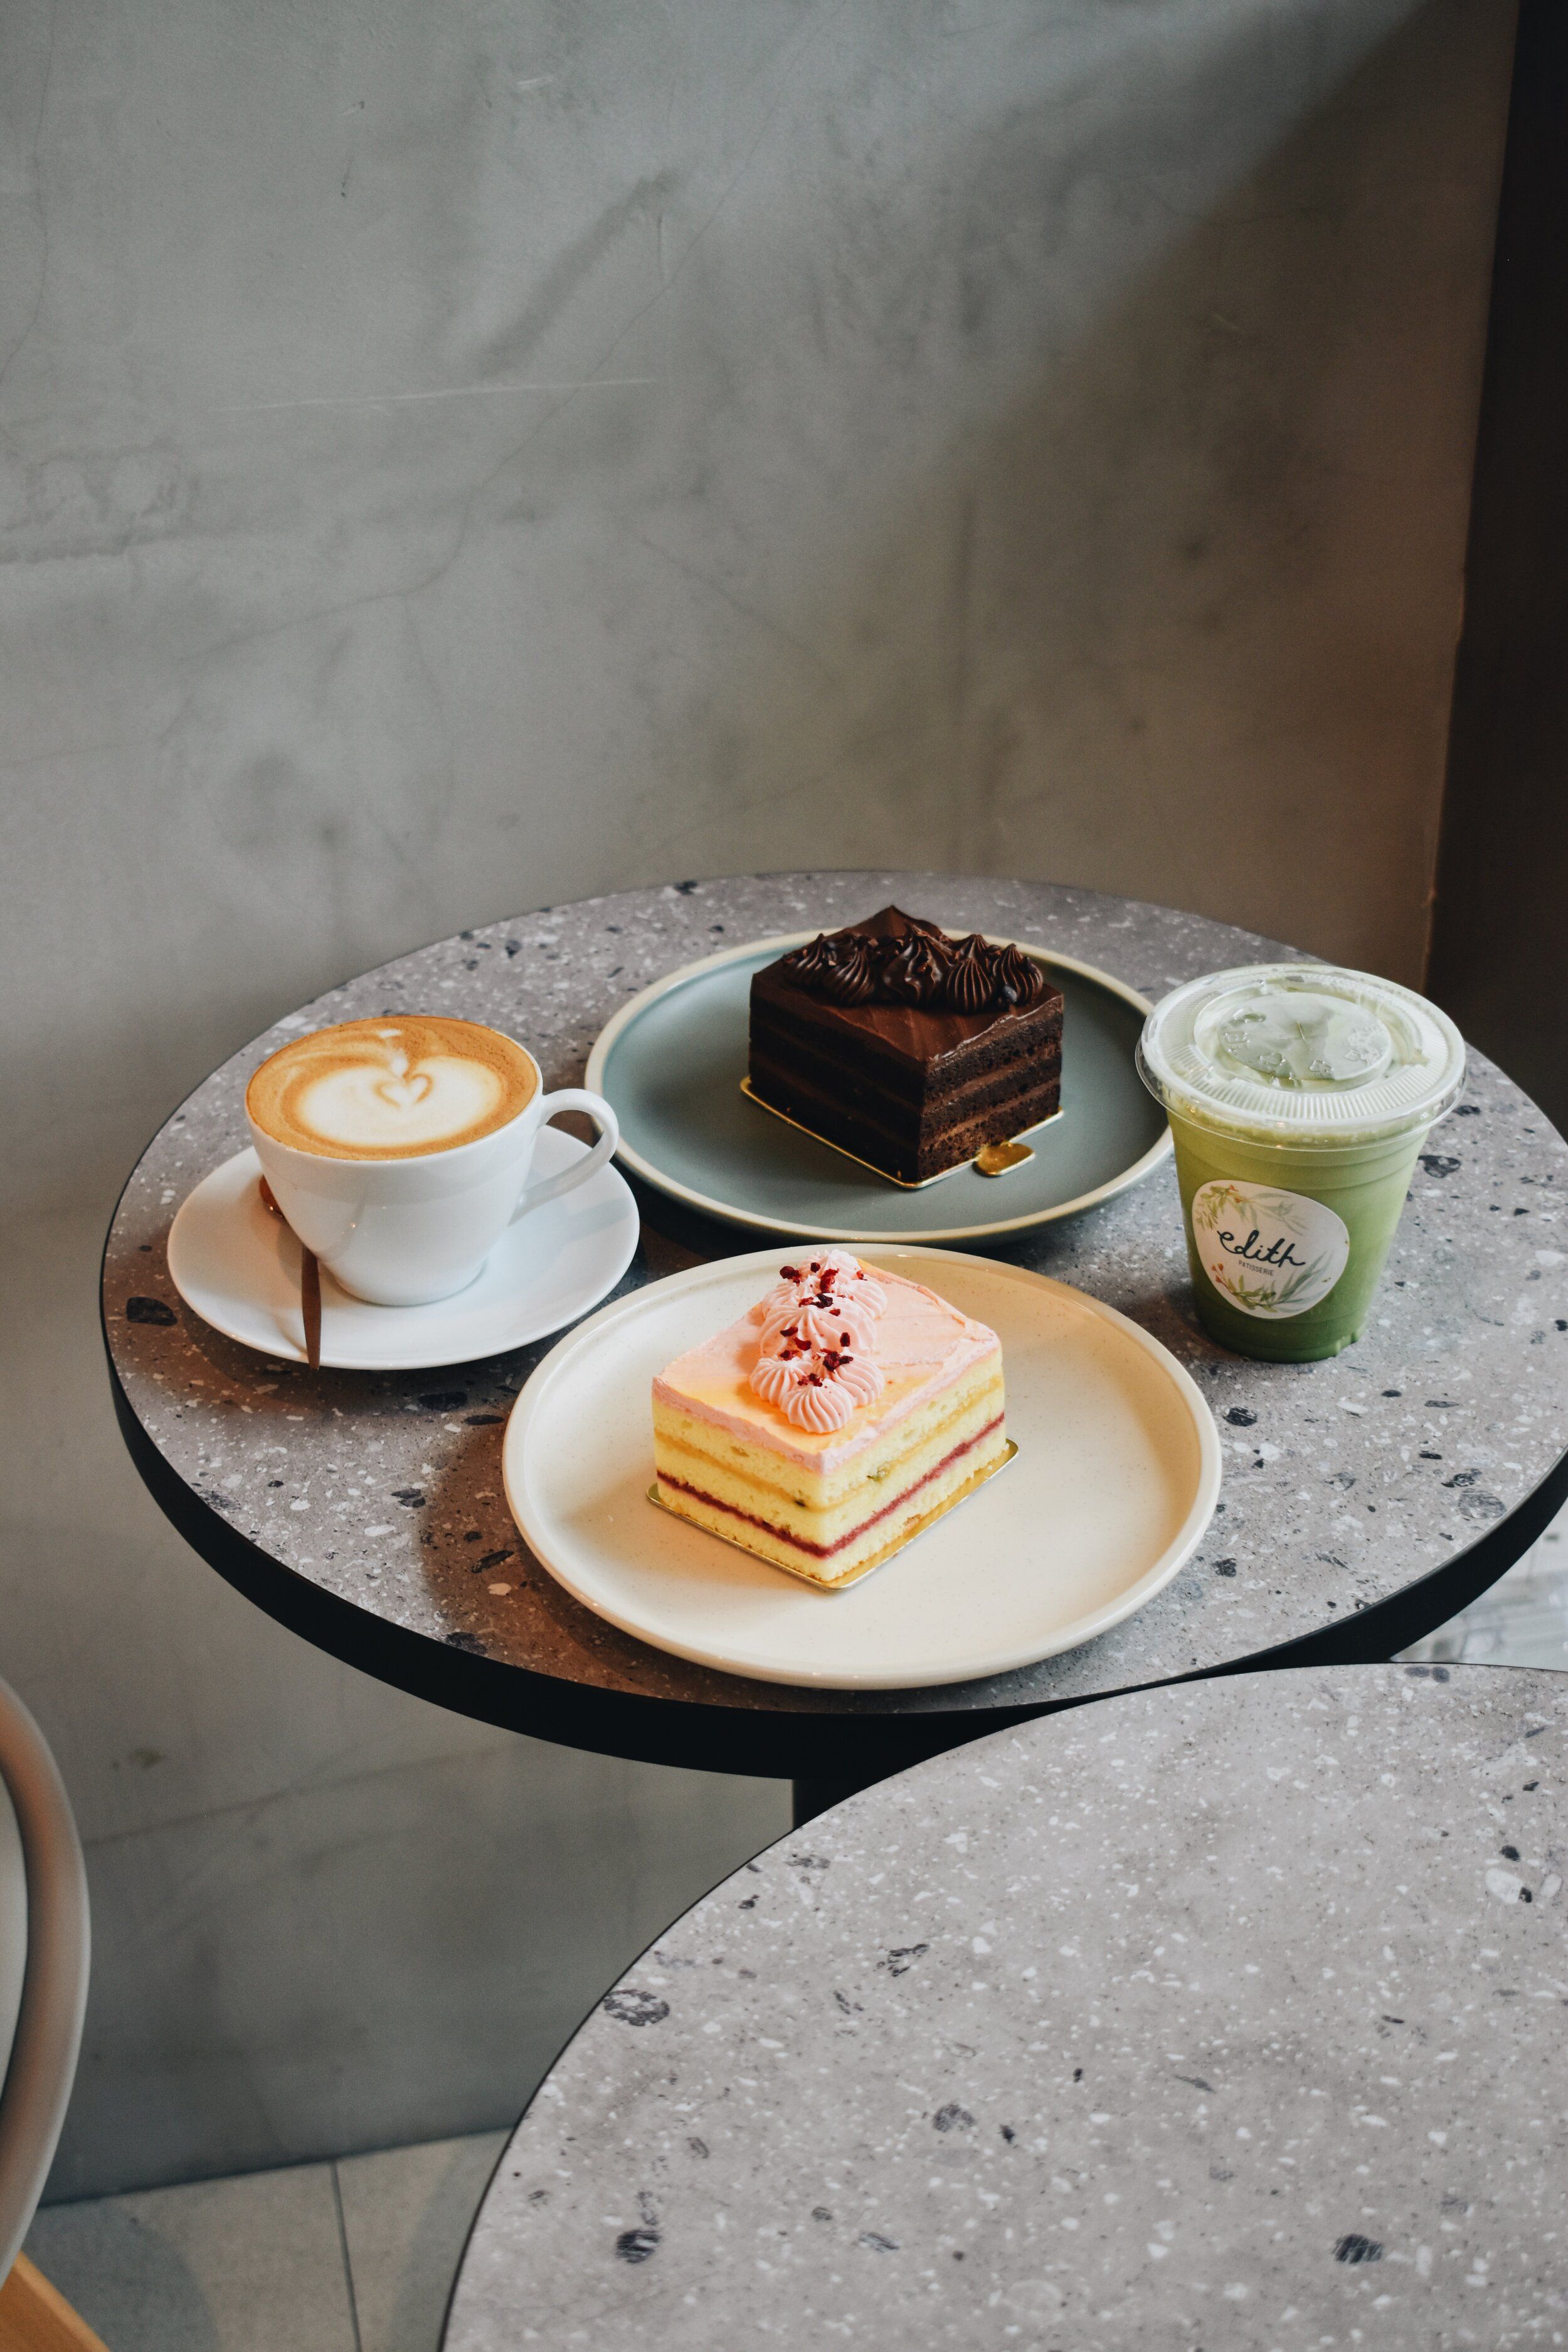 Edith Patisserie Cake Bar: Cakes, Honey Soft Serve and Waffles at Dhoby Ghaut